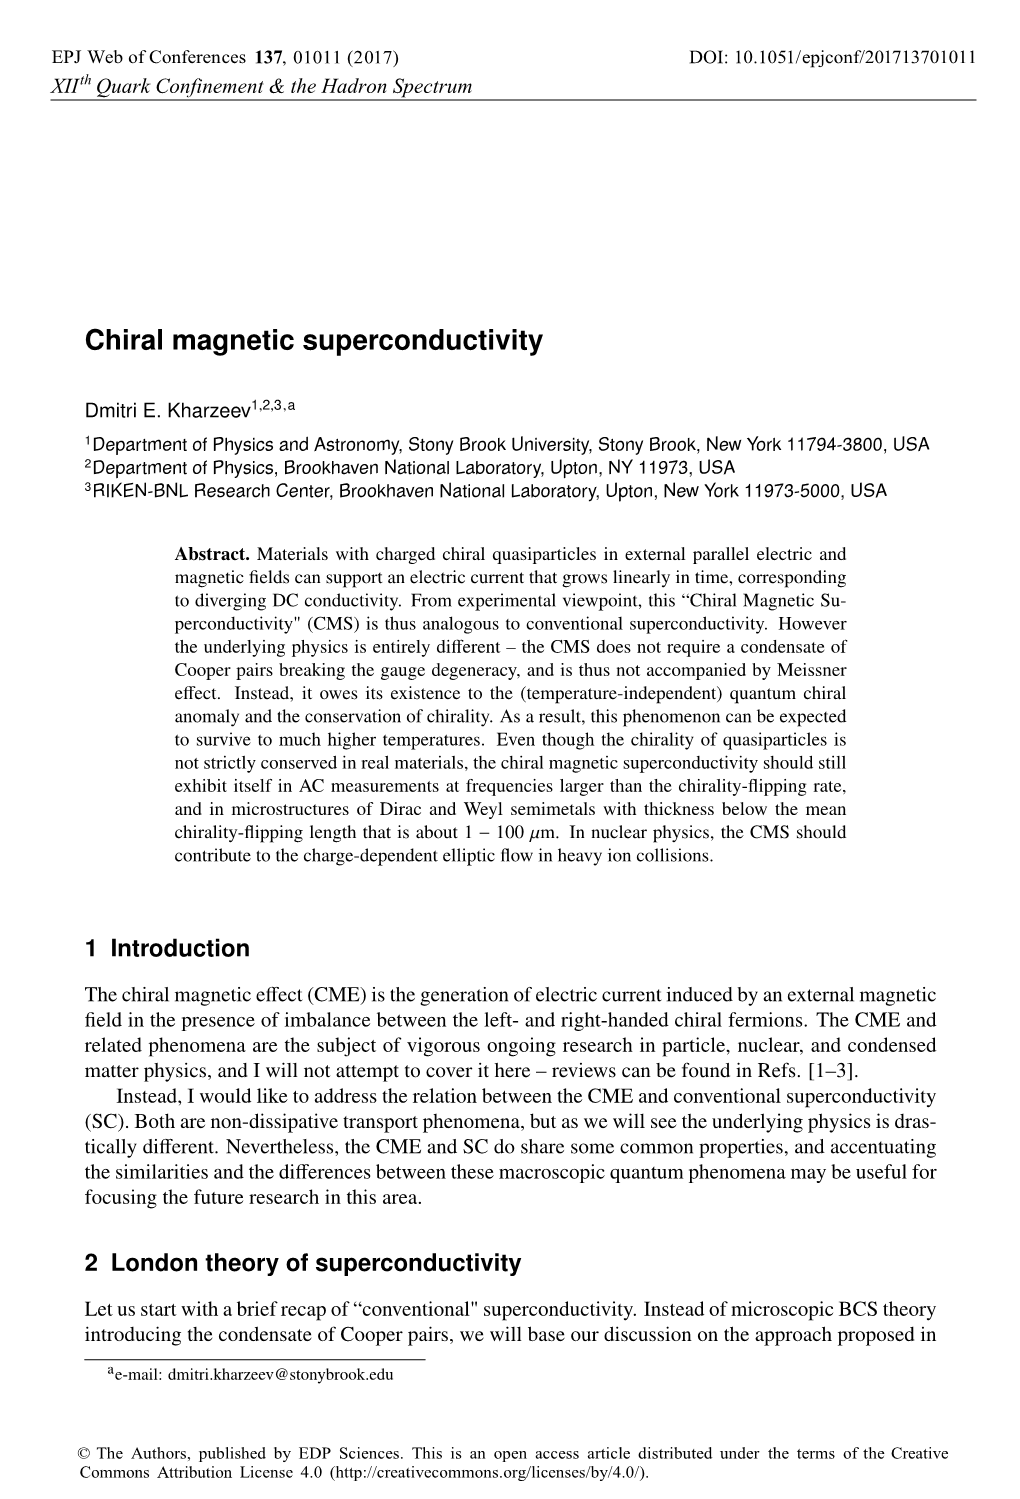 Chiral Magnetic Superconductivity